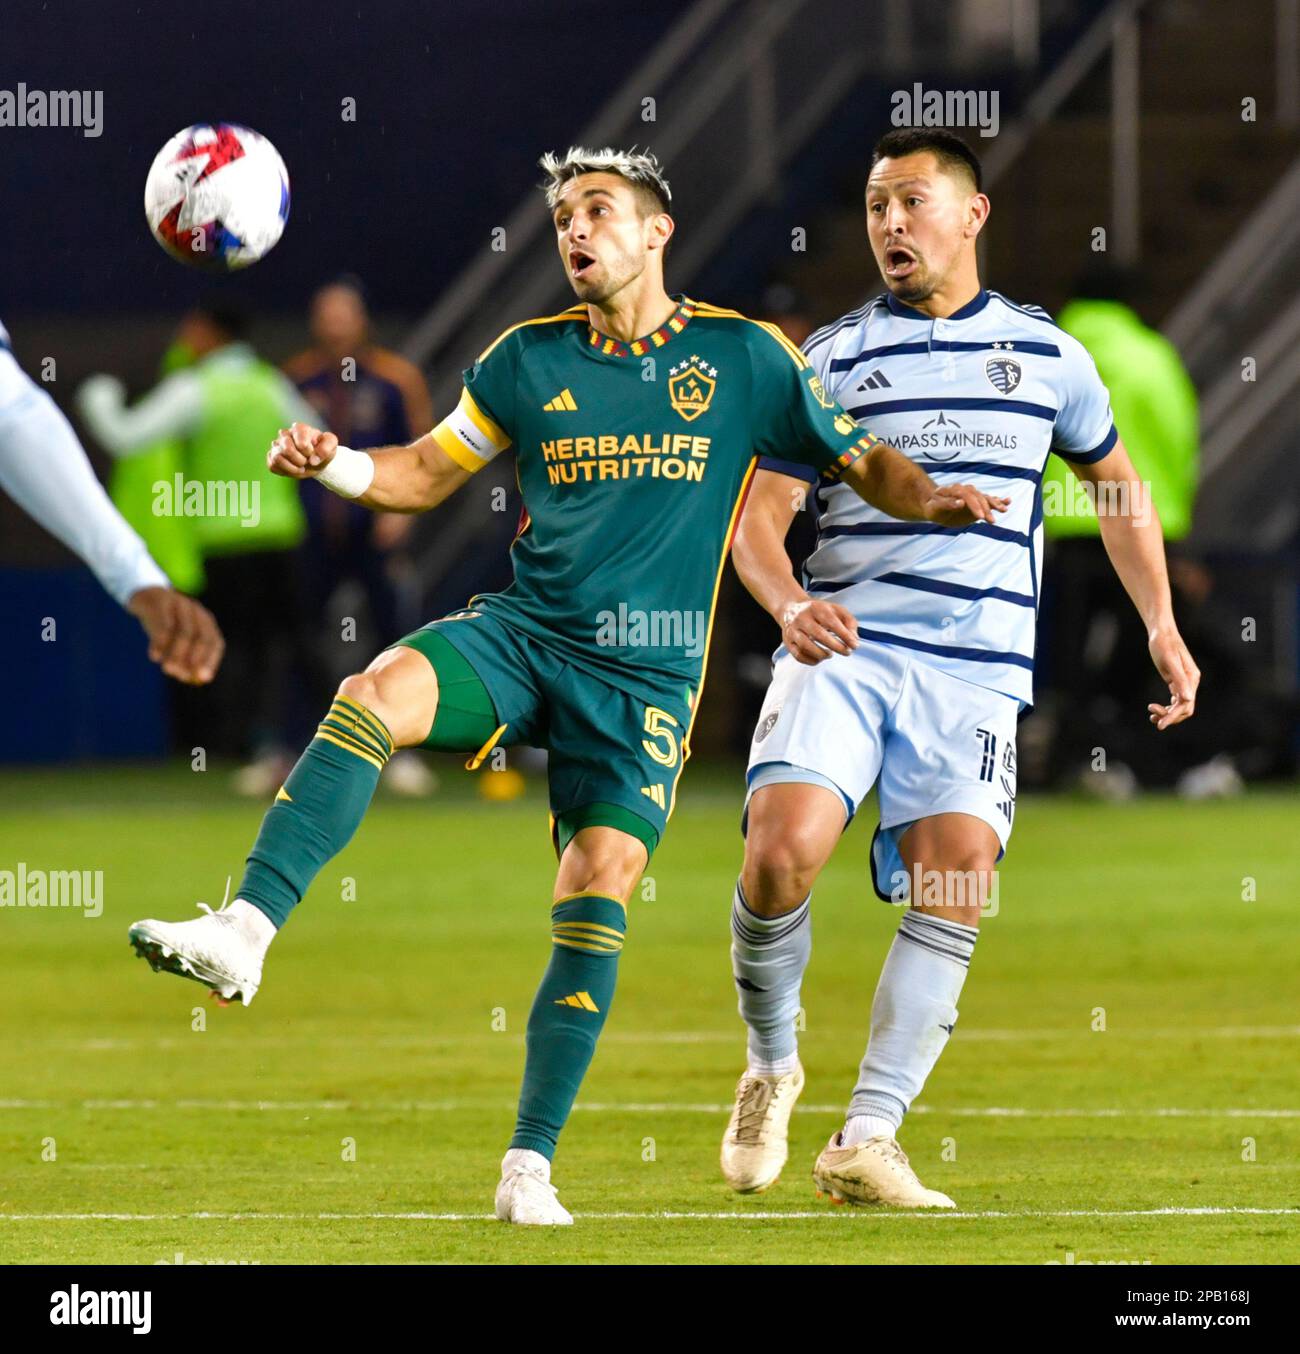 Kansas City, USA. 11th Mar, 2023. Los Angeles Galaxy midfielder Gastón Brugman (5) and Sporting Kansas City midfielder Roger Espinoza (15) watch the ball drop. Sporting KC hosted the LA Galaxy in a Major League Soccer game on March 11, 2023 at Children's Mercy Park Stadium in Kansas City, KS, USA. Photo by Tim Vizer/Sipa USA Credit: Sipa USA/Alamy Live News Stock Photo